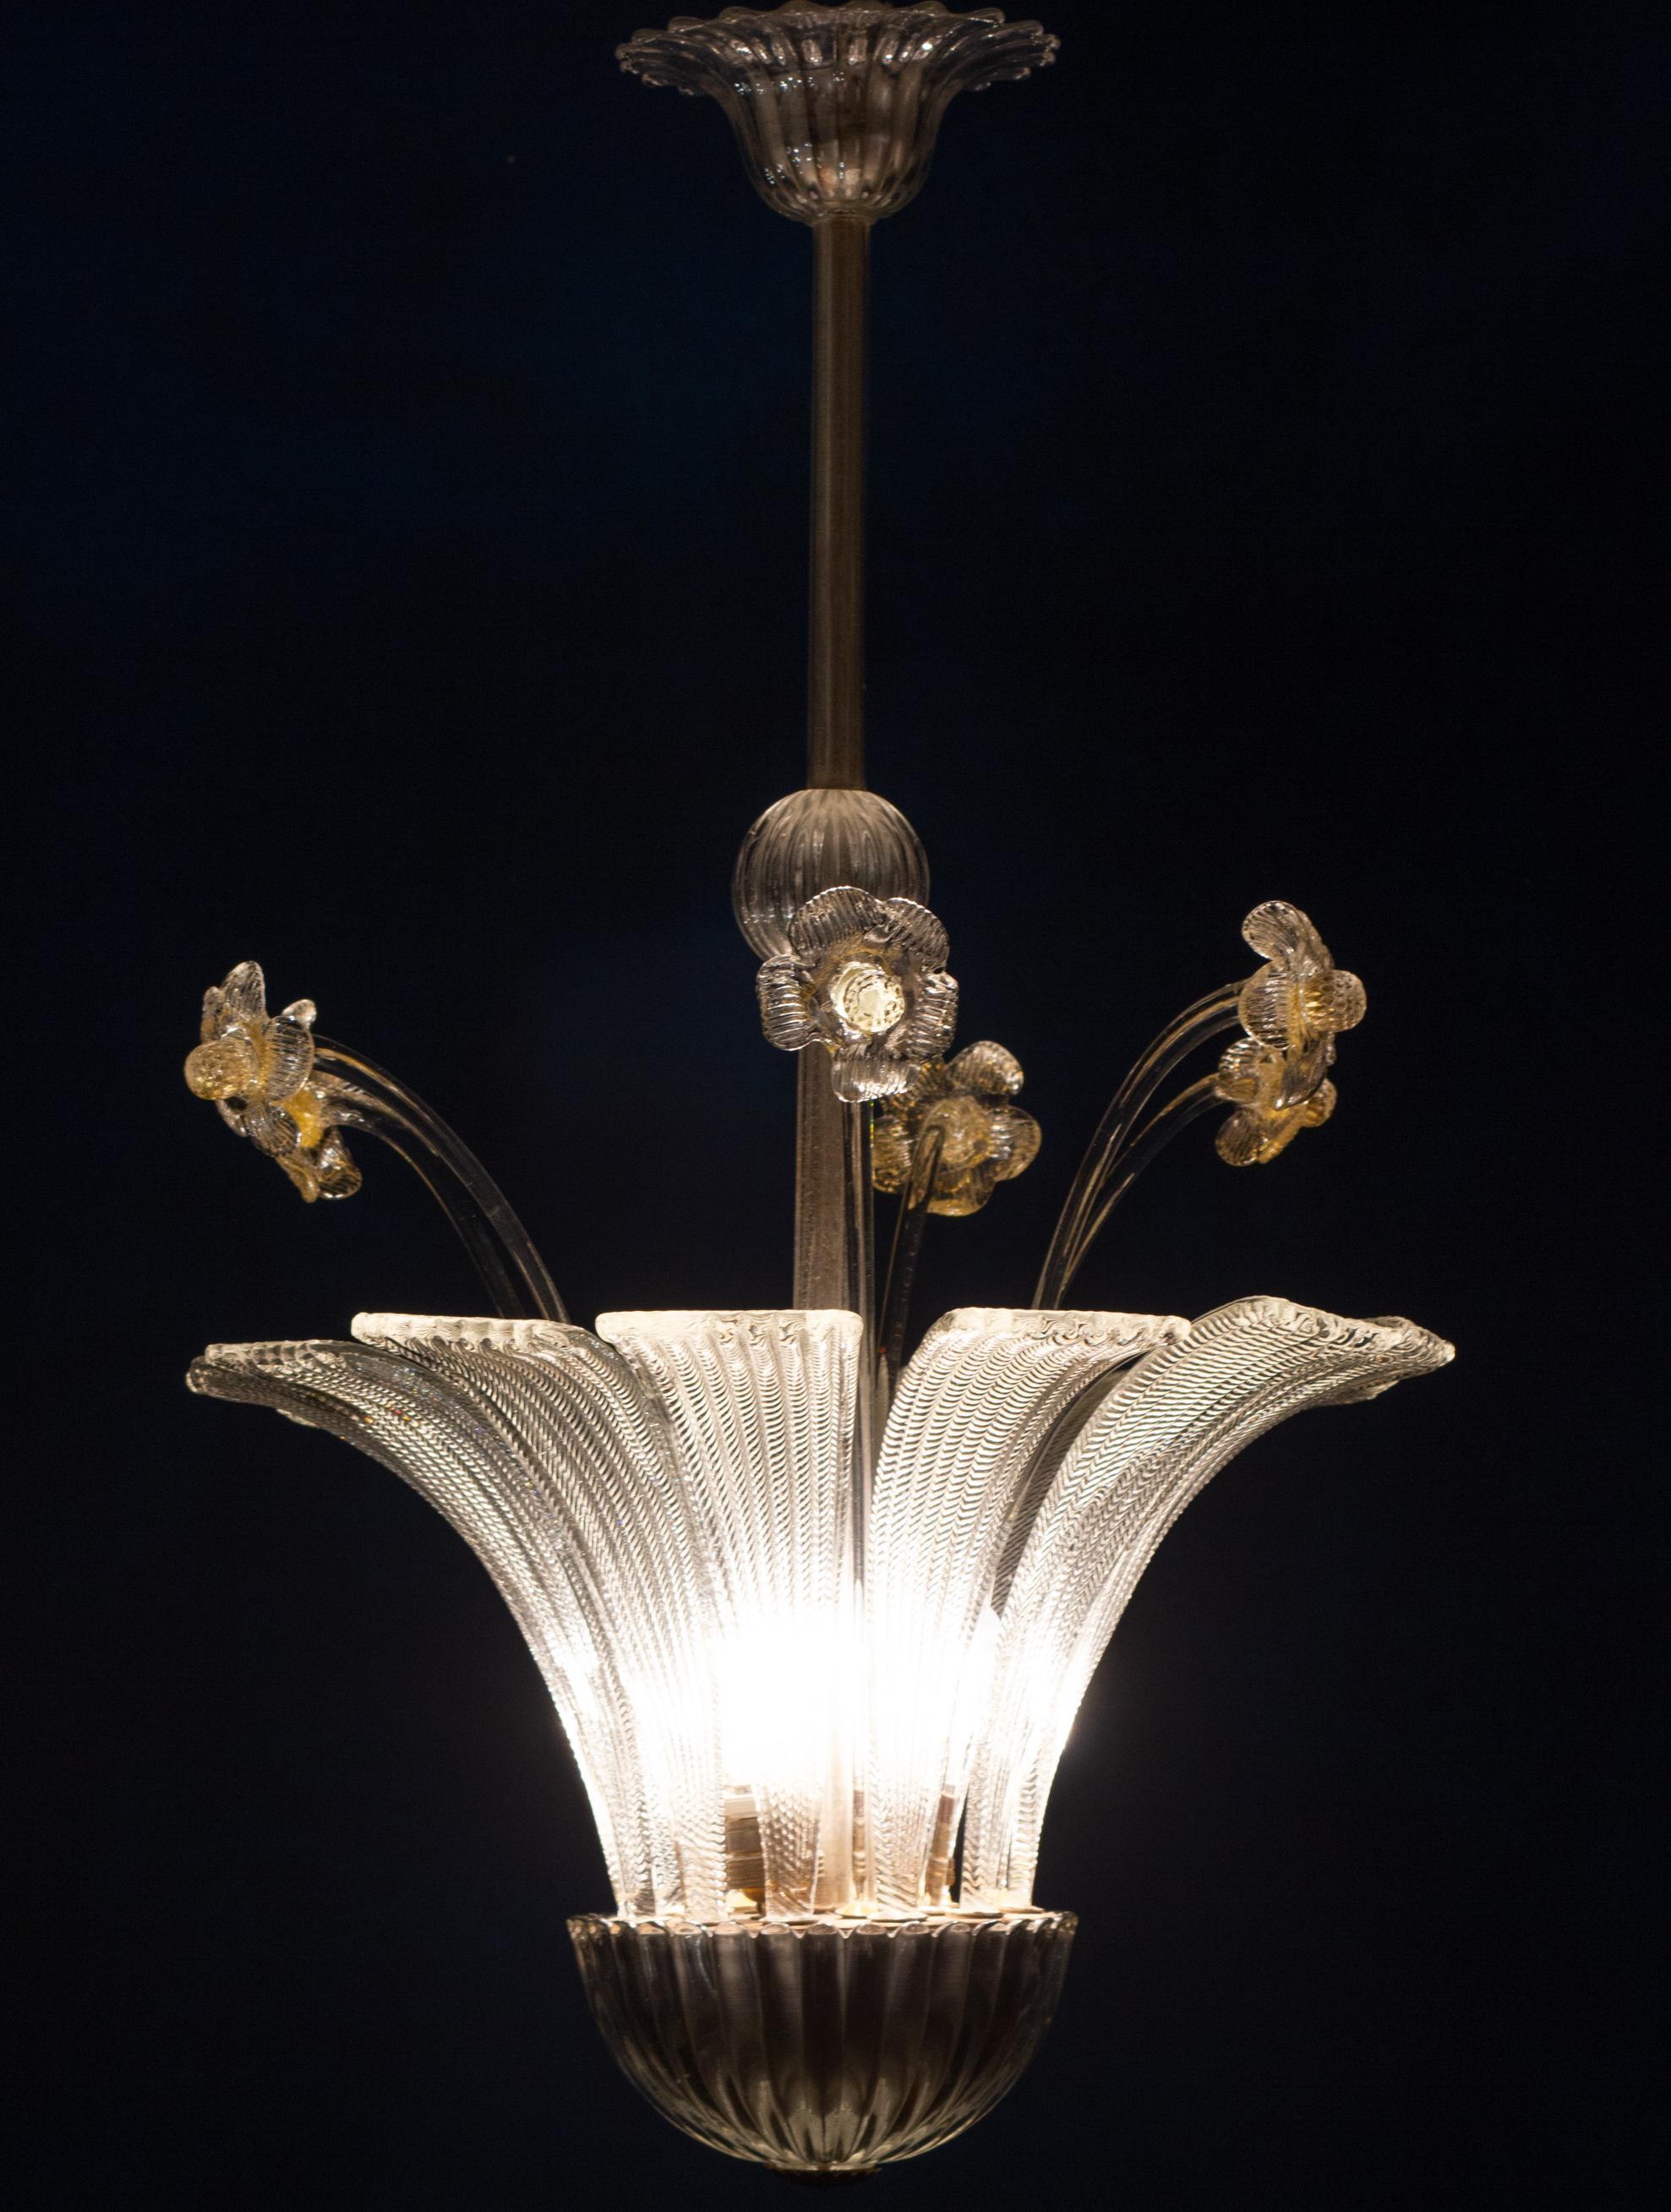 Charming Mid-Century Chandelier or Lantern by Barovier 1950' For Sale 7